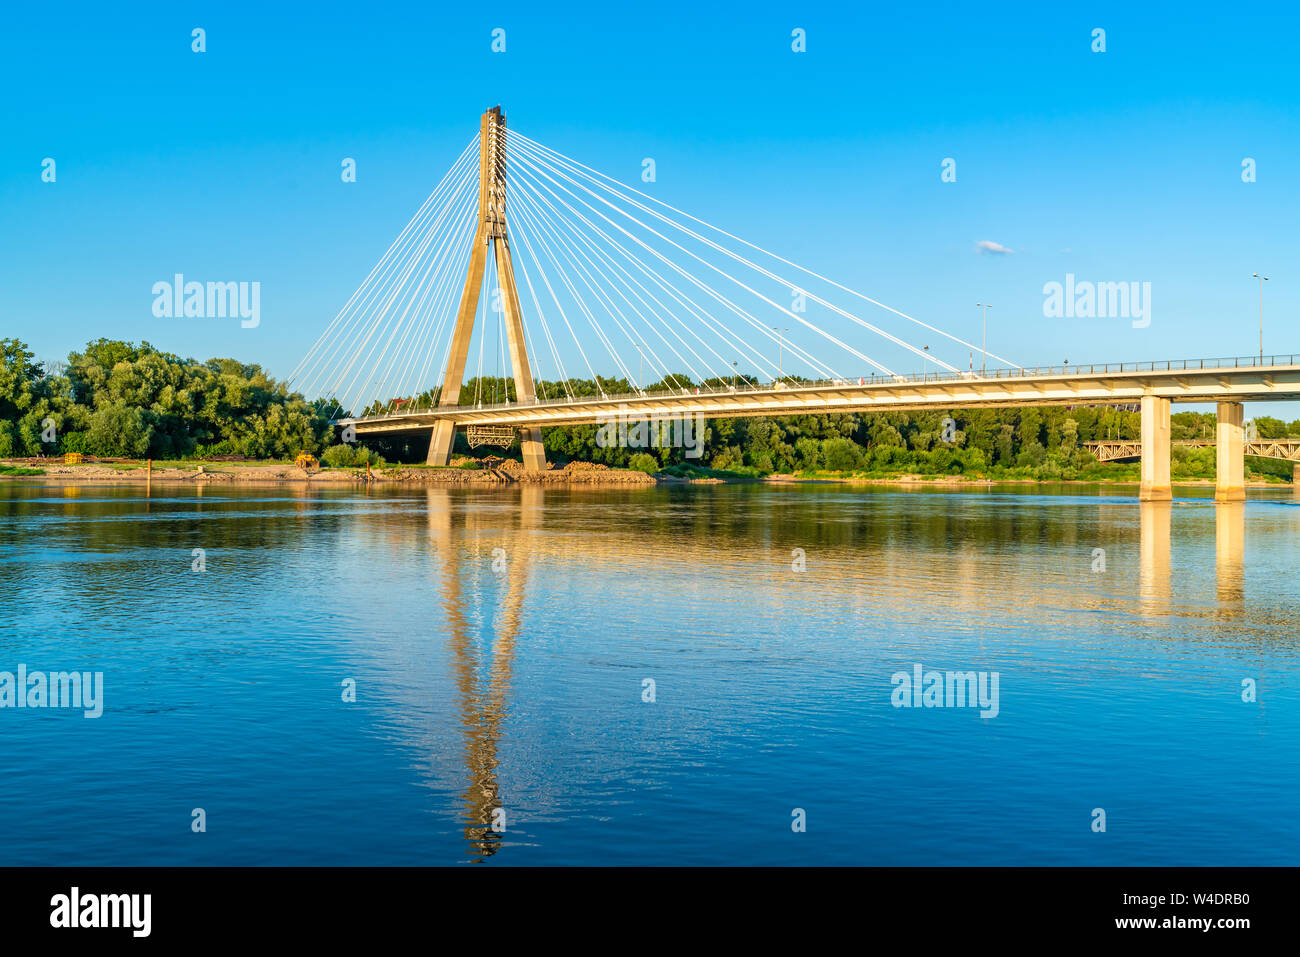 WARSAW, POLAND - JULY 18, 2019: Opened on 06/10/2000, a 479 meters long Swietokrzyski cable-stayed bridge over the Vistula river in Warsaw links Powis Stock Photo